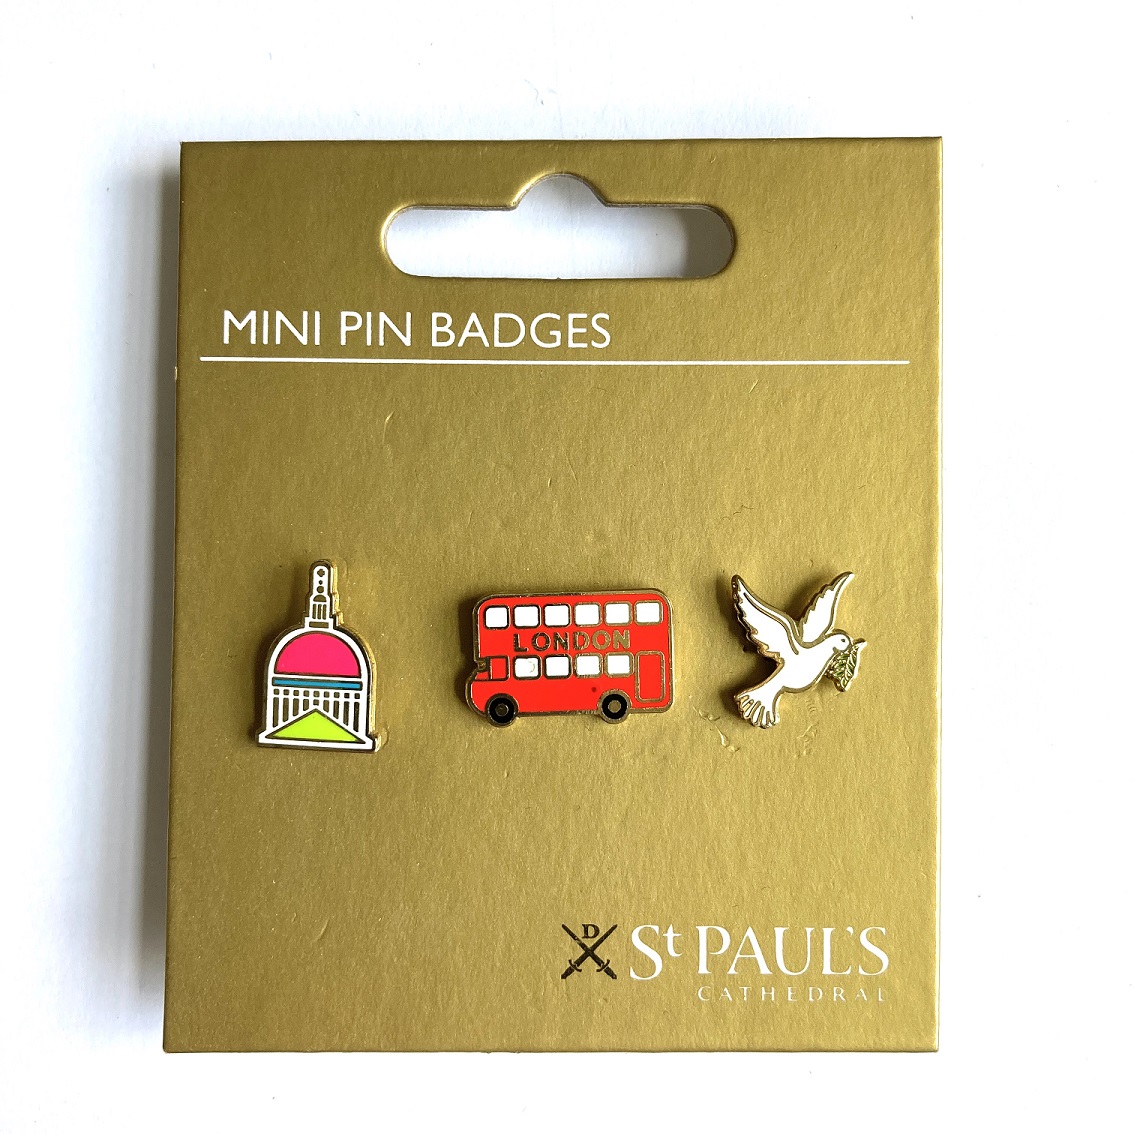 Set on mini St Paul's Cathedral pin badges